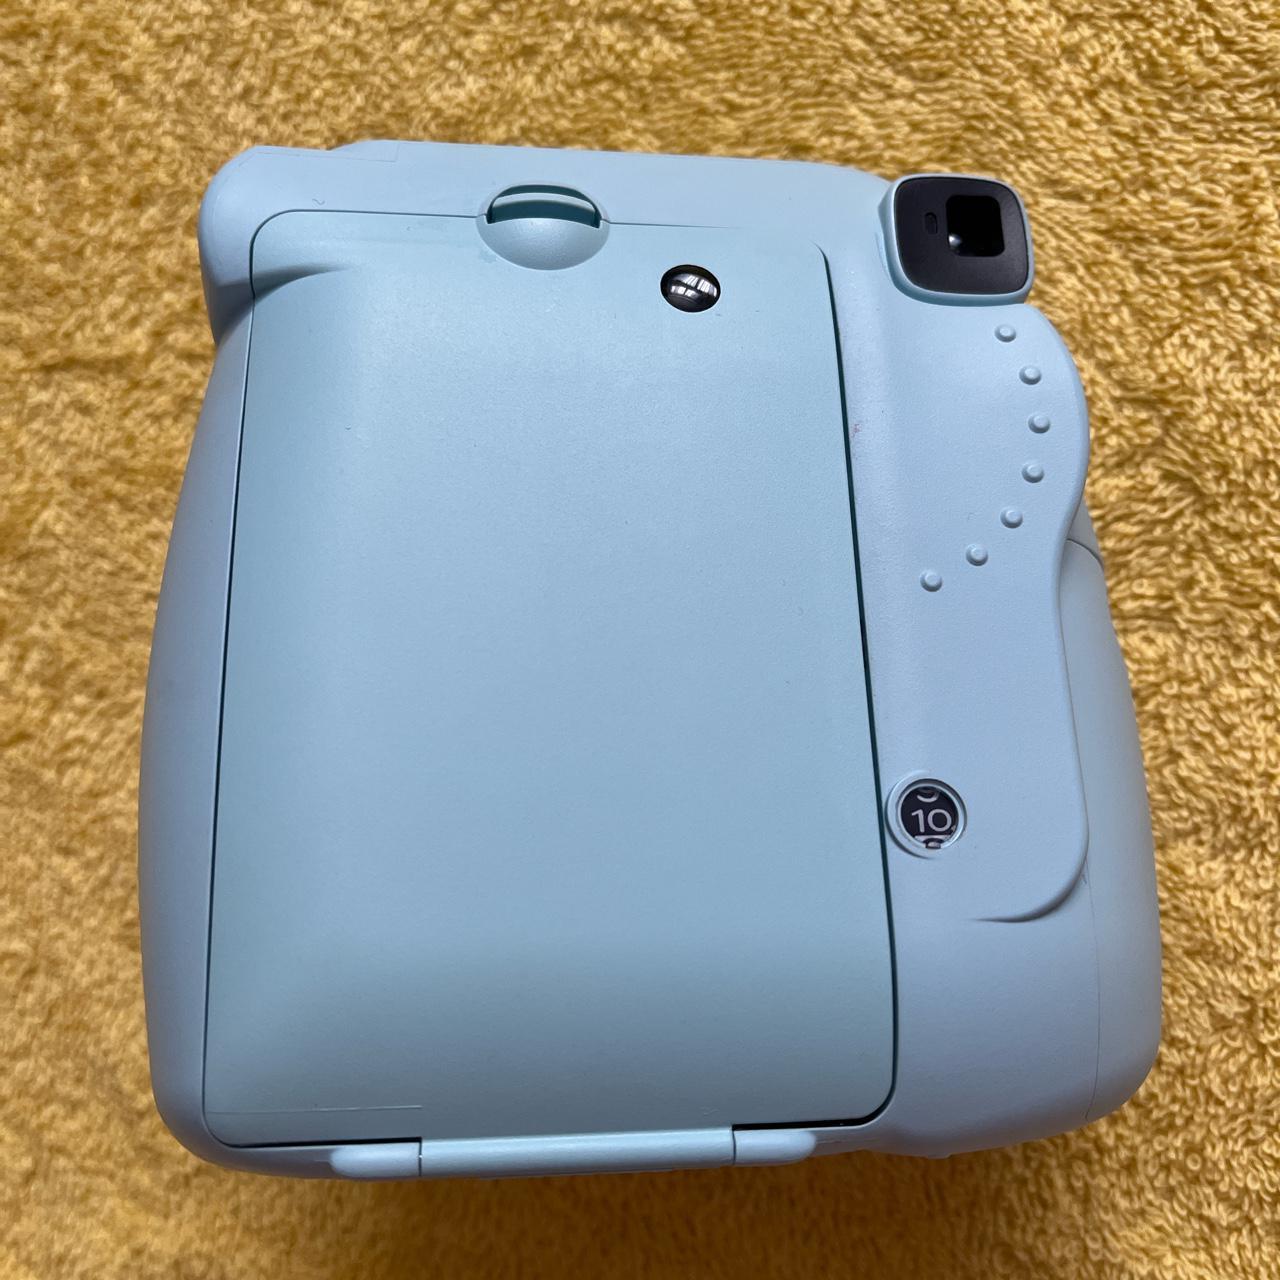 Product Image 2 - polaroid instax mini 8
great condition